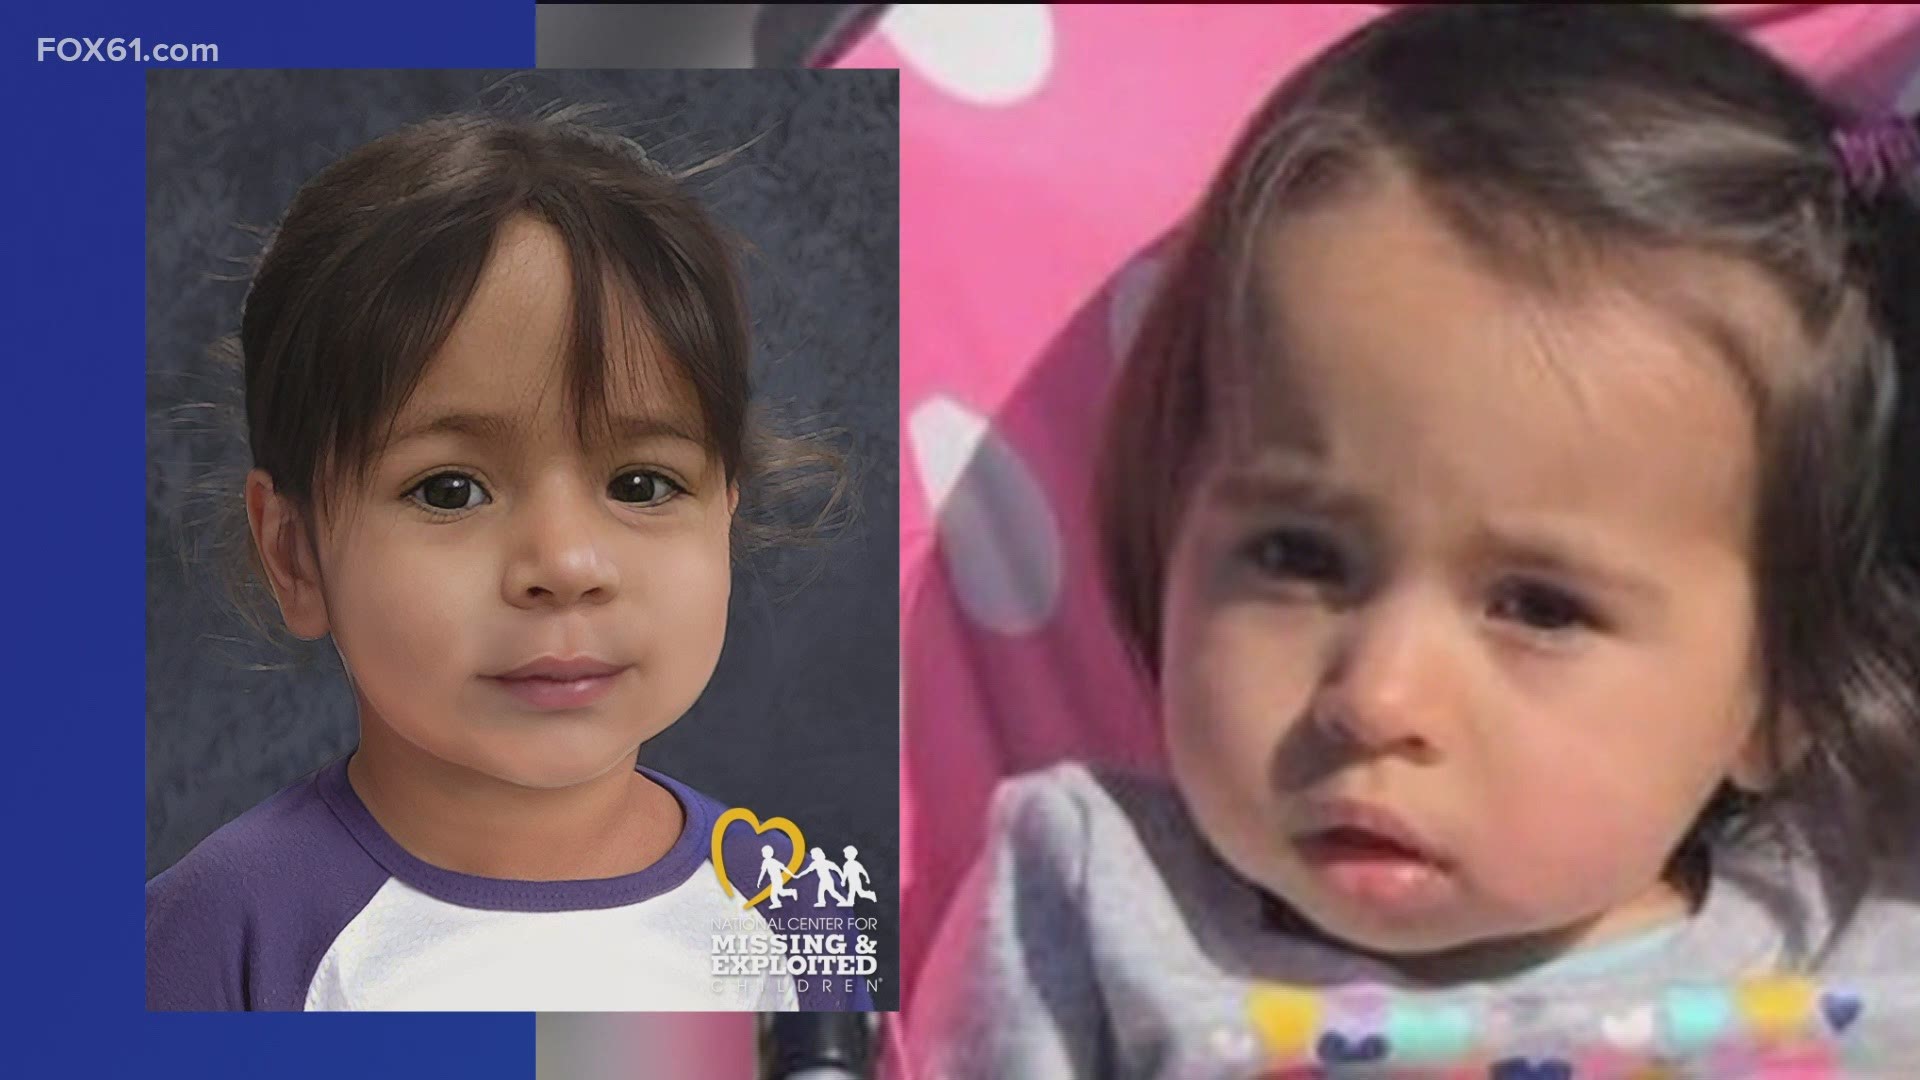 Police released the picture of Friday of the missing child who has not been seen since late 2019.